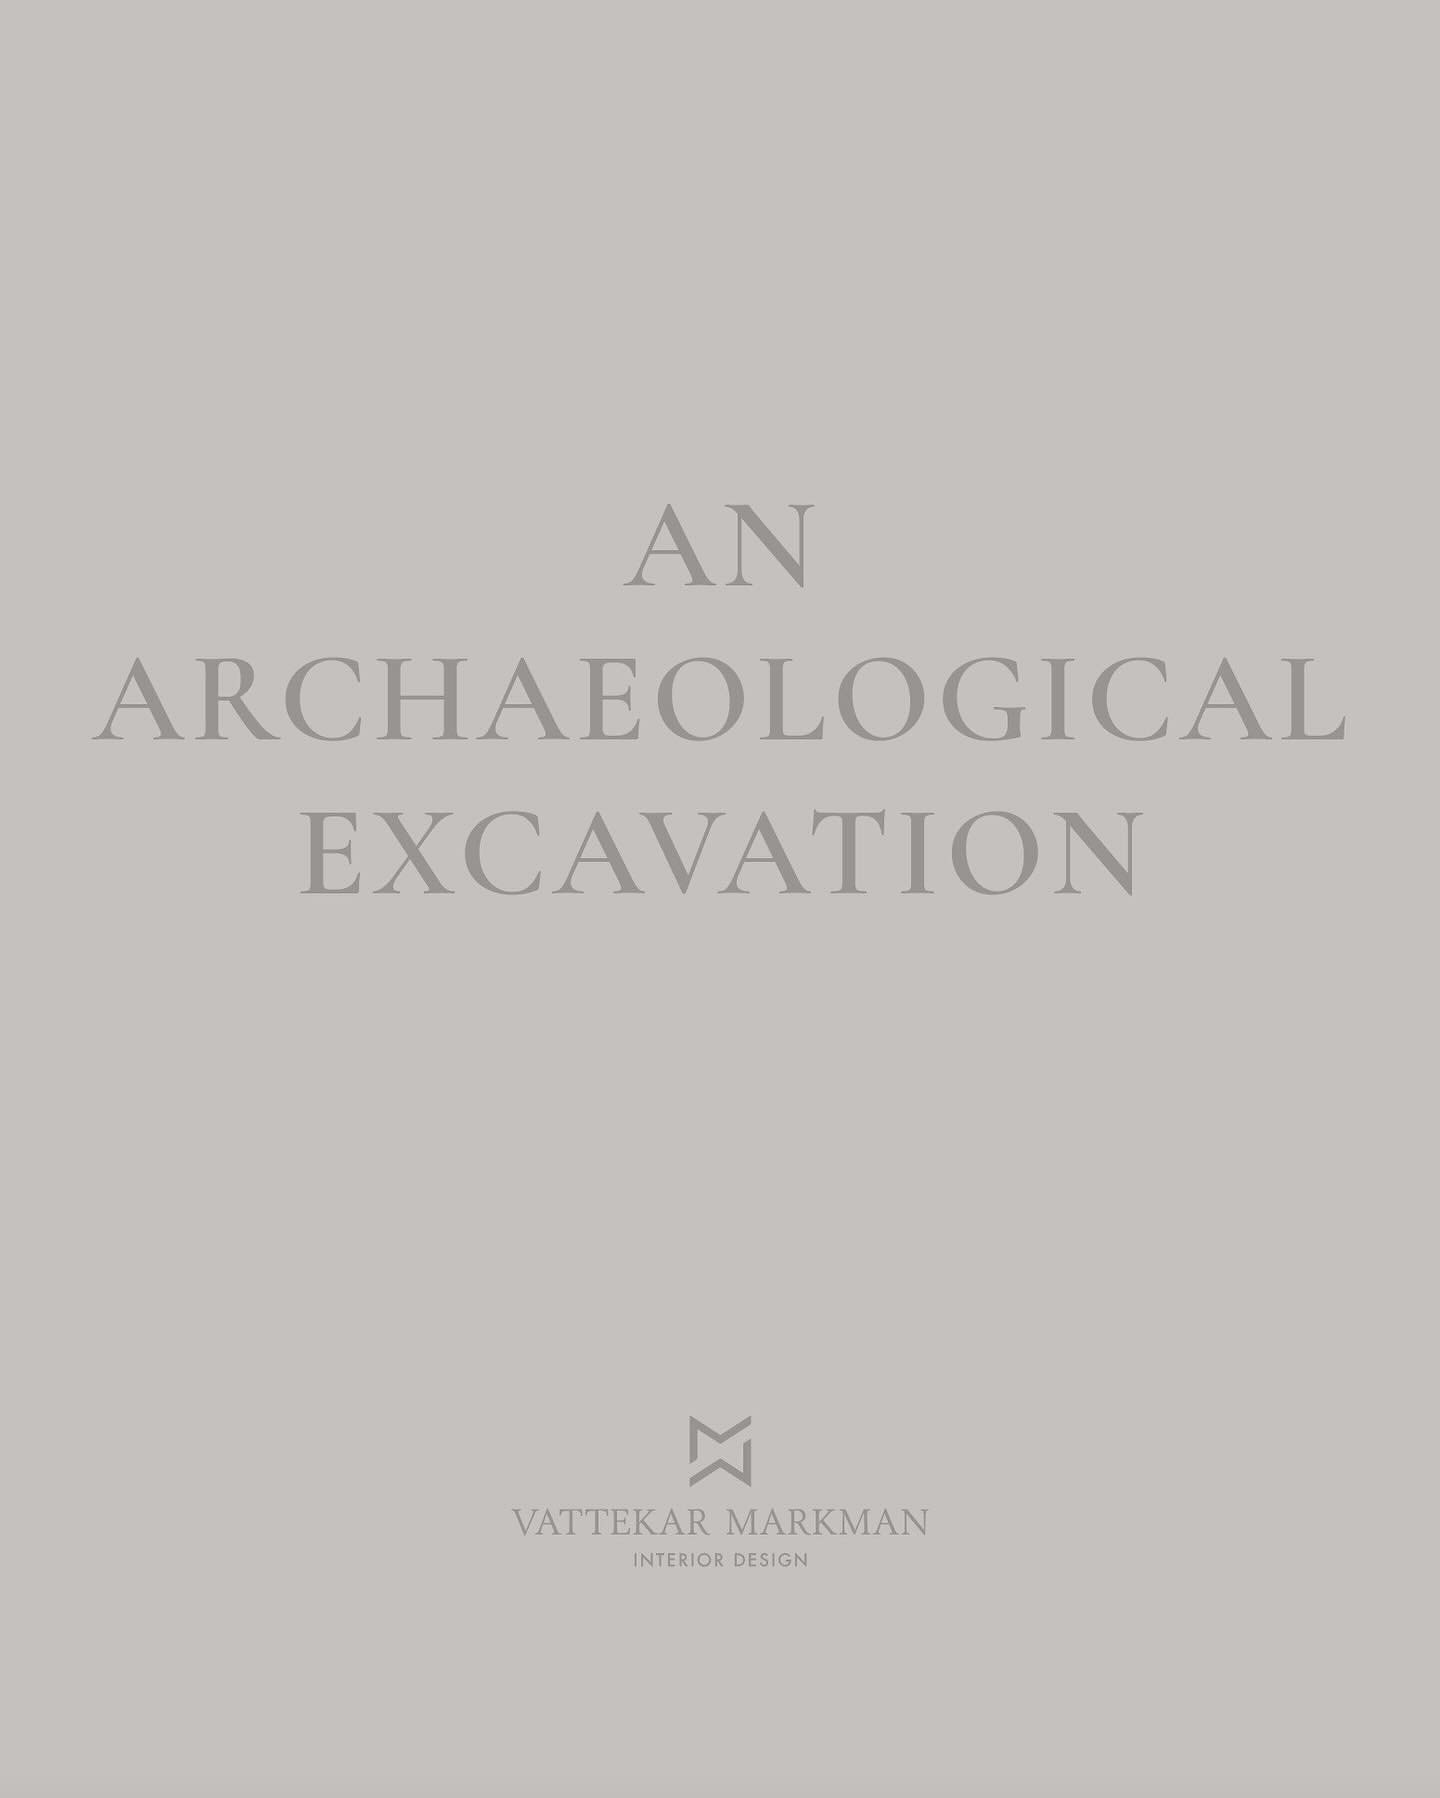 VMID PROJECT &bull; An archaeological excavation&hellip;
⠀⠀⠀⠀⠀⠀⠀⠀⠀
As you probably know, I am more than average interested in architectural history, history of styles and how buildings have evolved over time. I find that there is something truly fasc